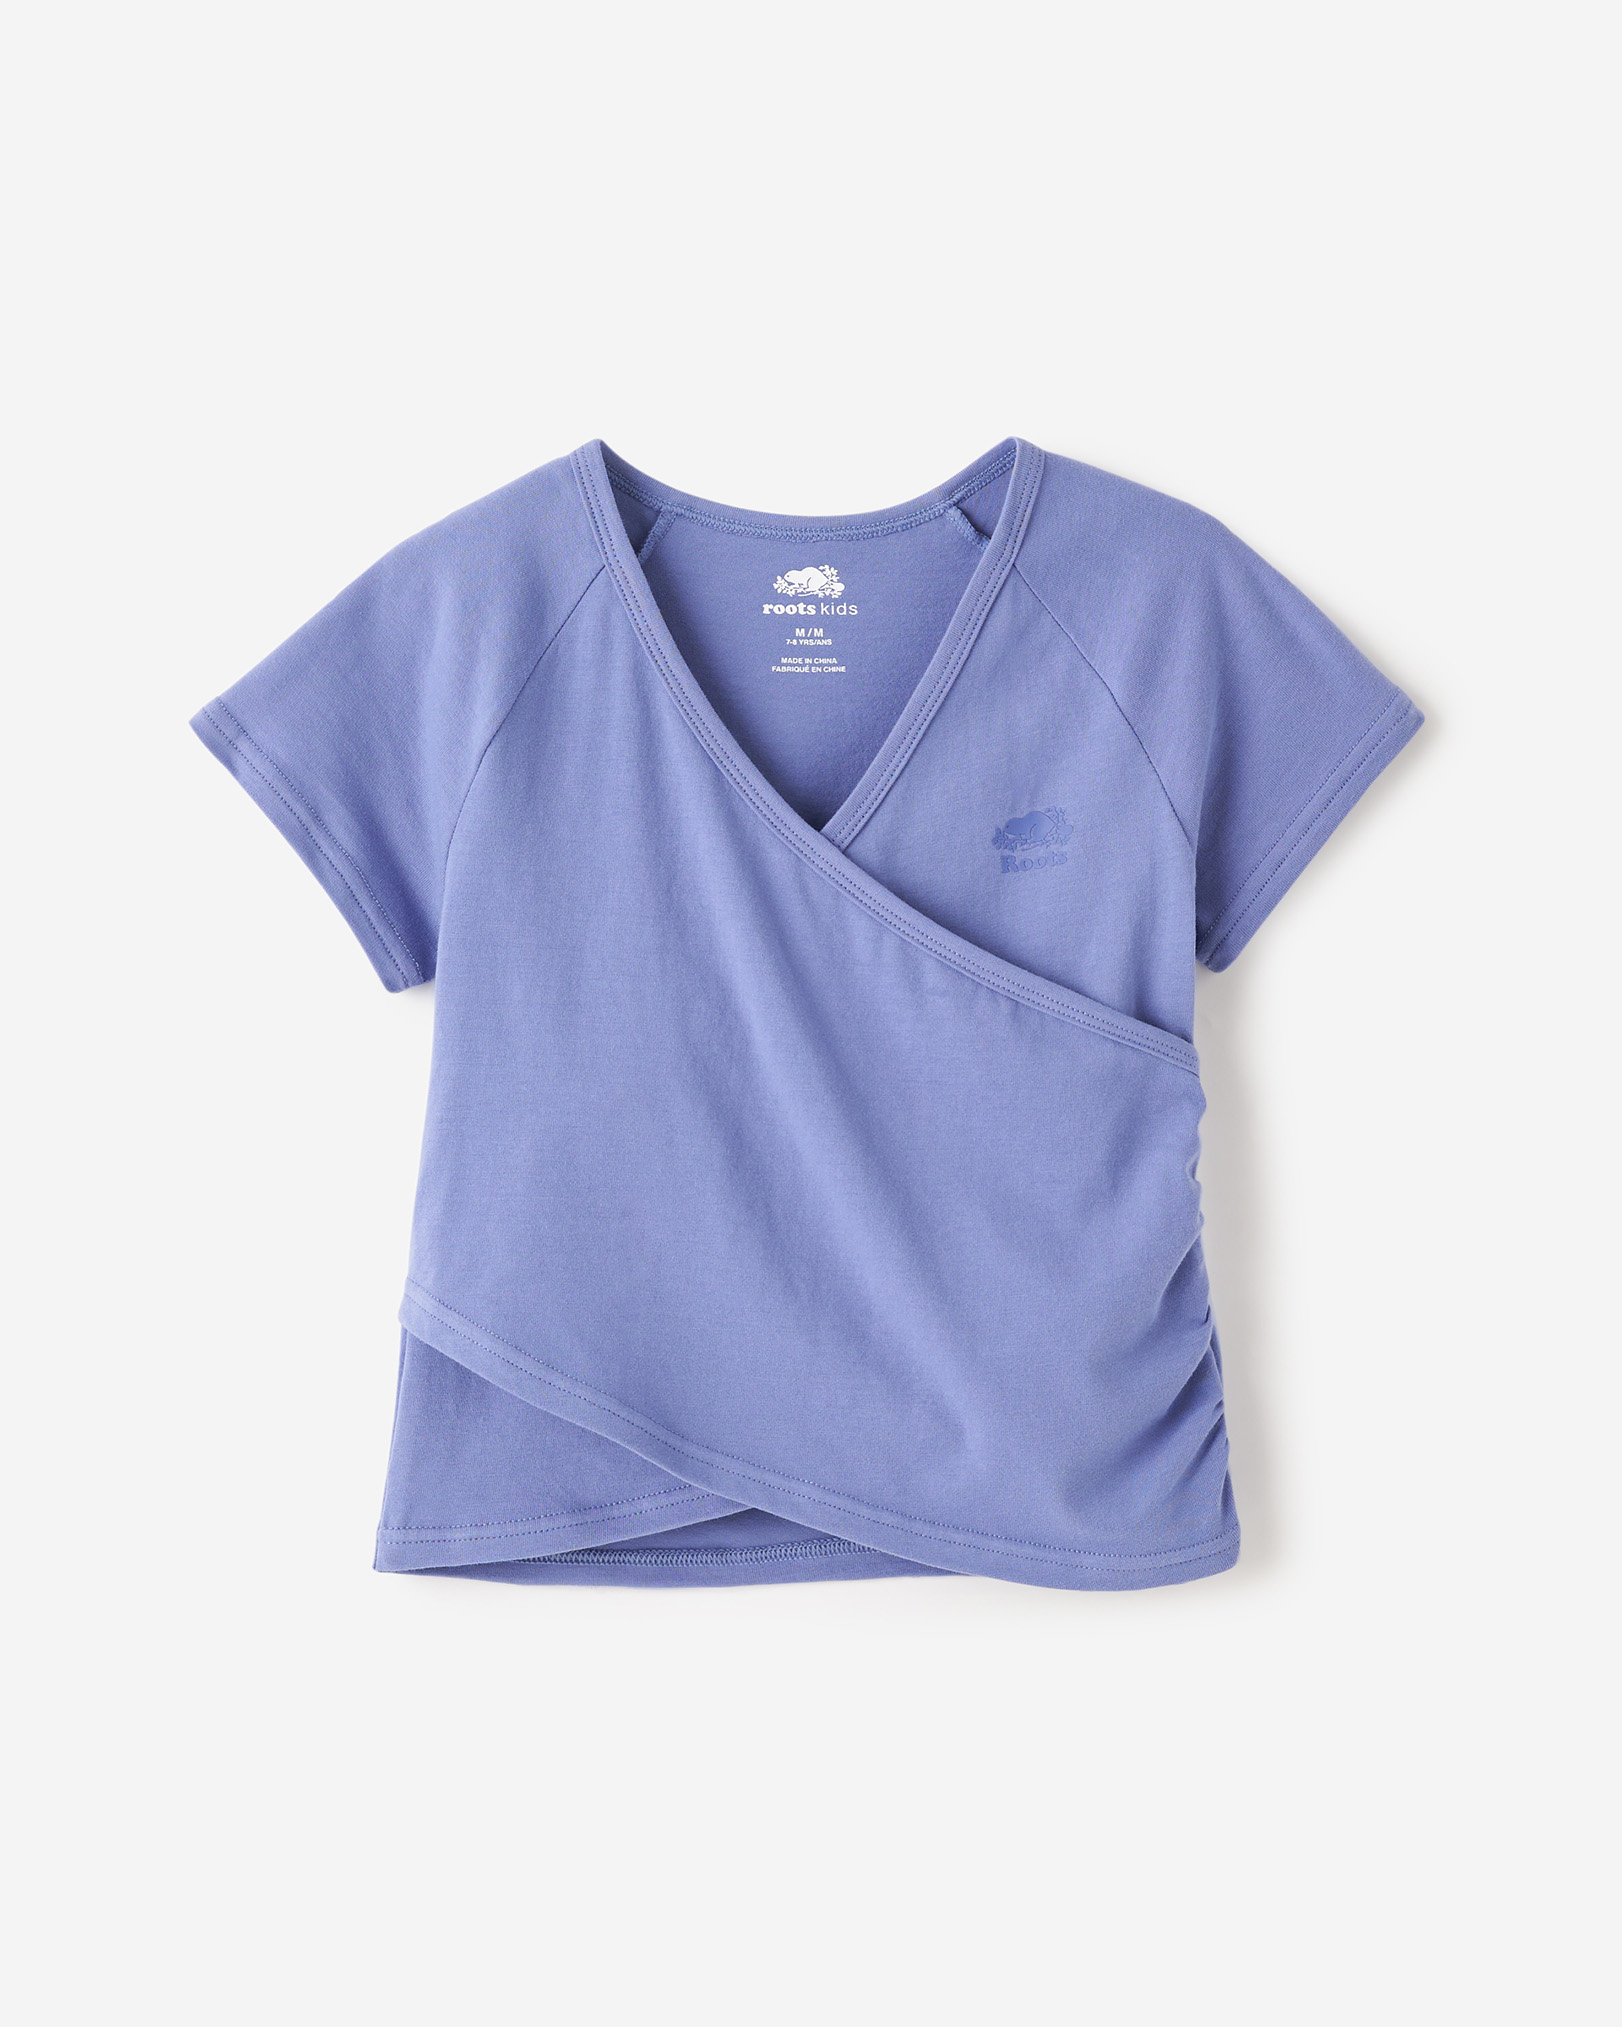 Roots Girl's Easy Stretch Wrap T-Shirt in Periwinkle Purple